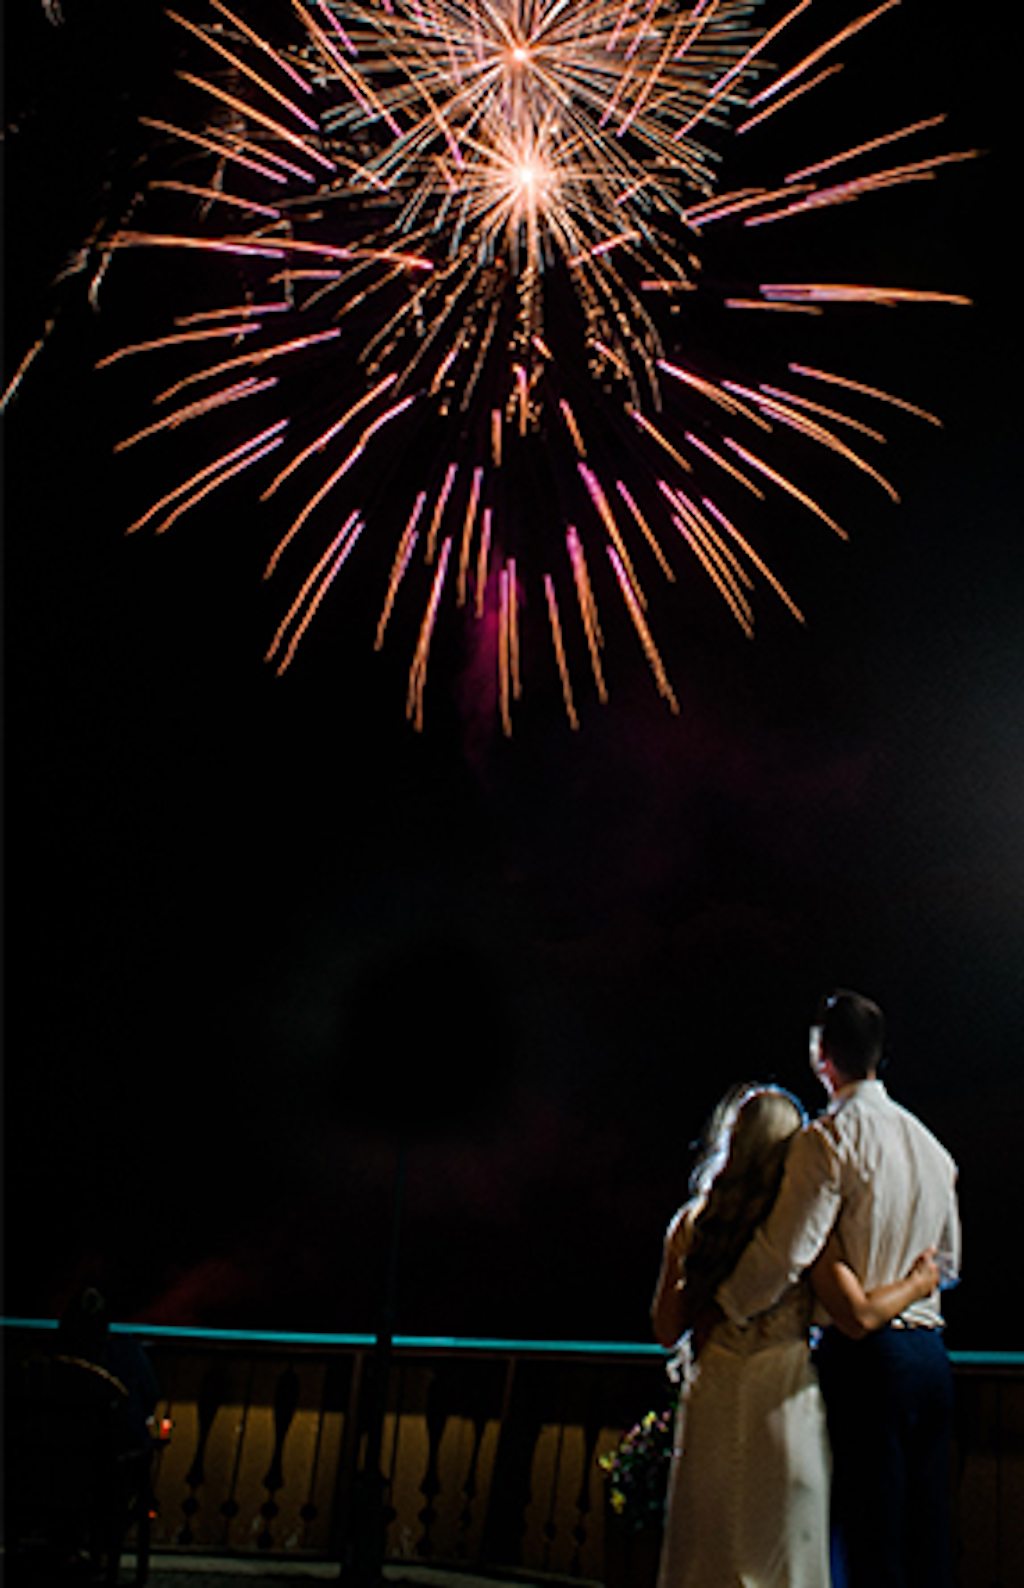 A newlywed couple embraces while they watch fireworks at their wedding.